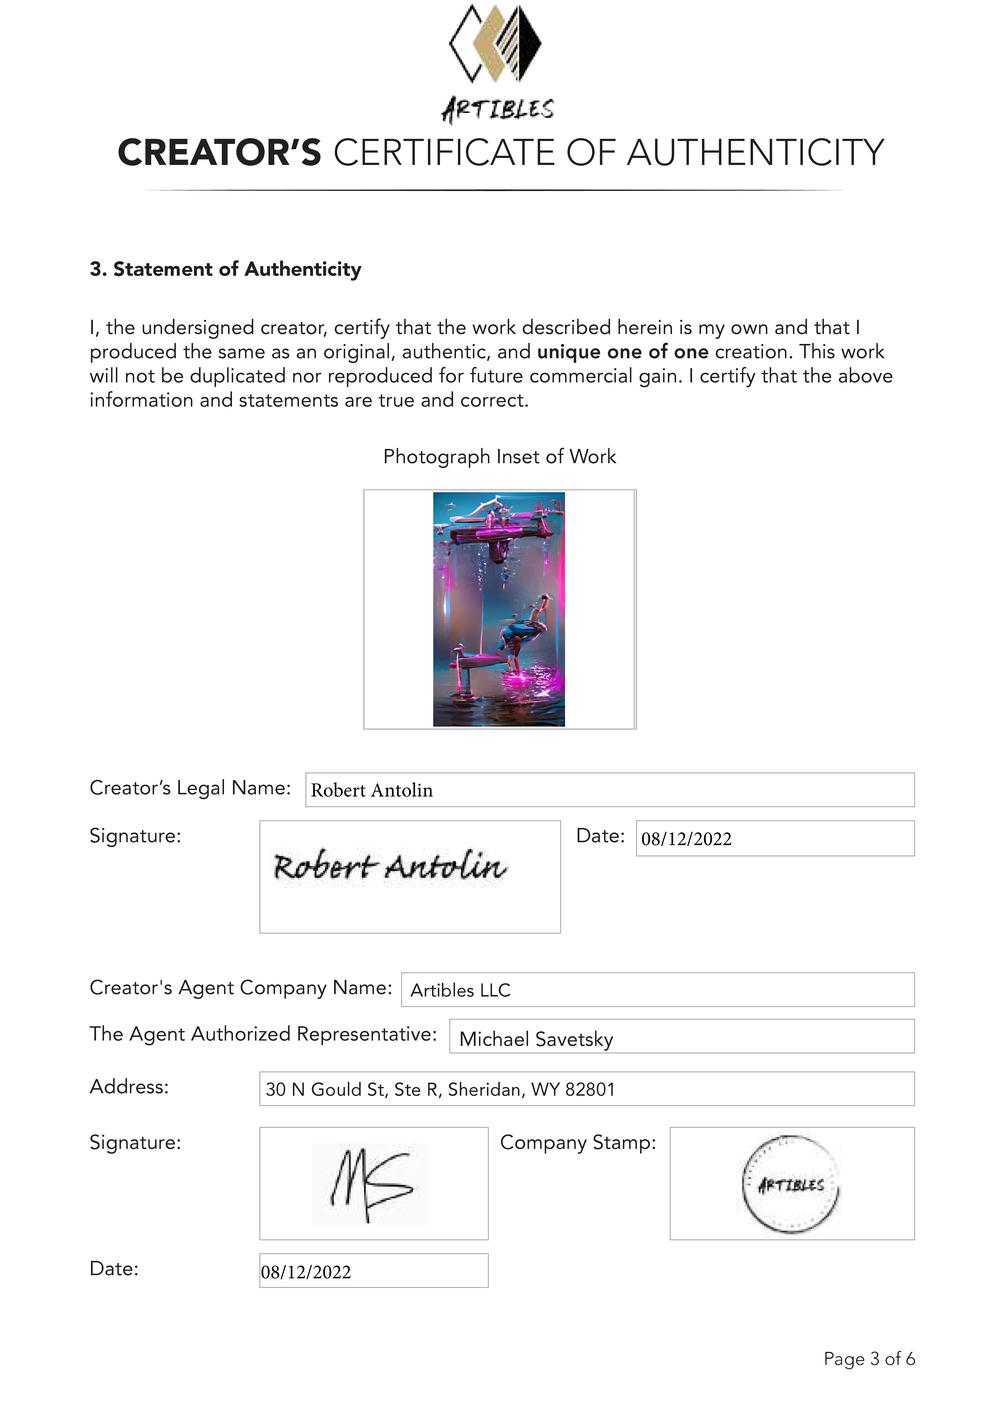 Certificate of Authenticity and Consignment - Counter Balance.pdf